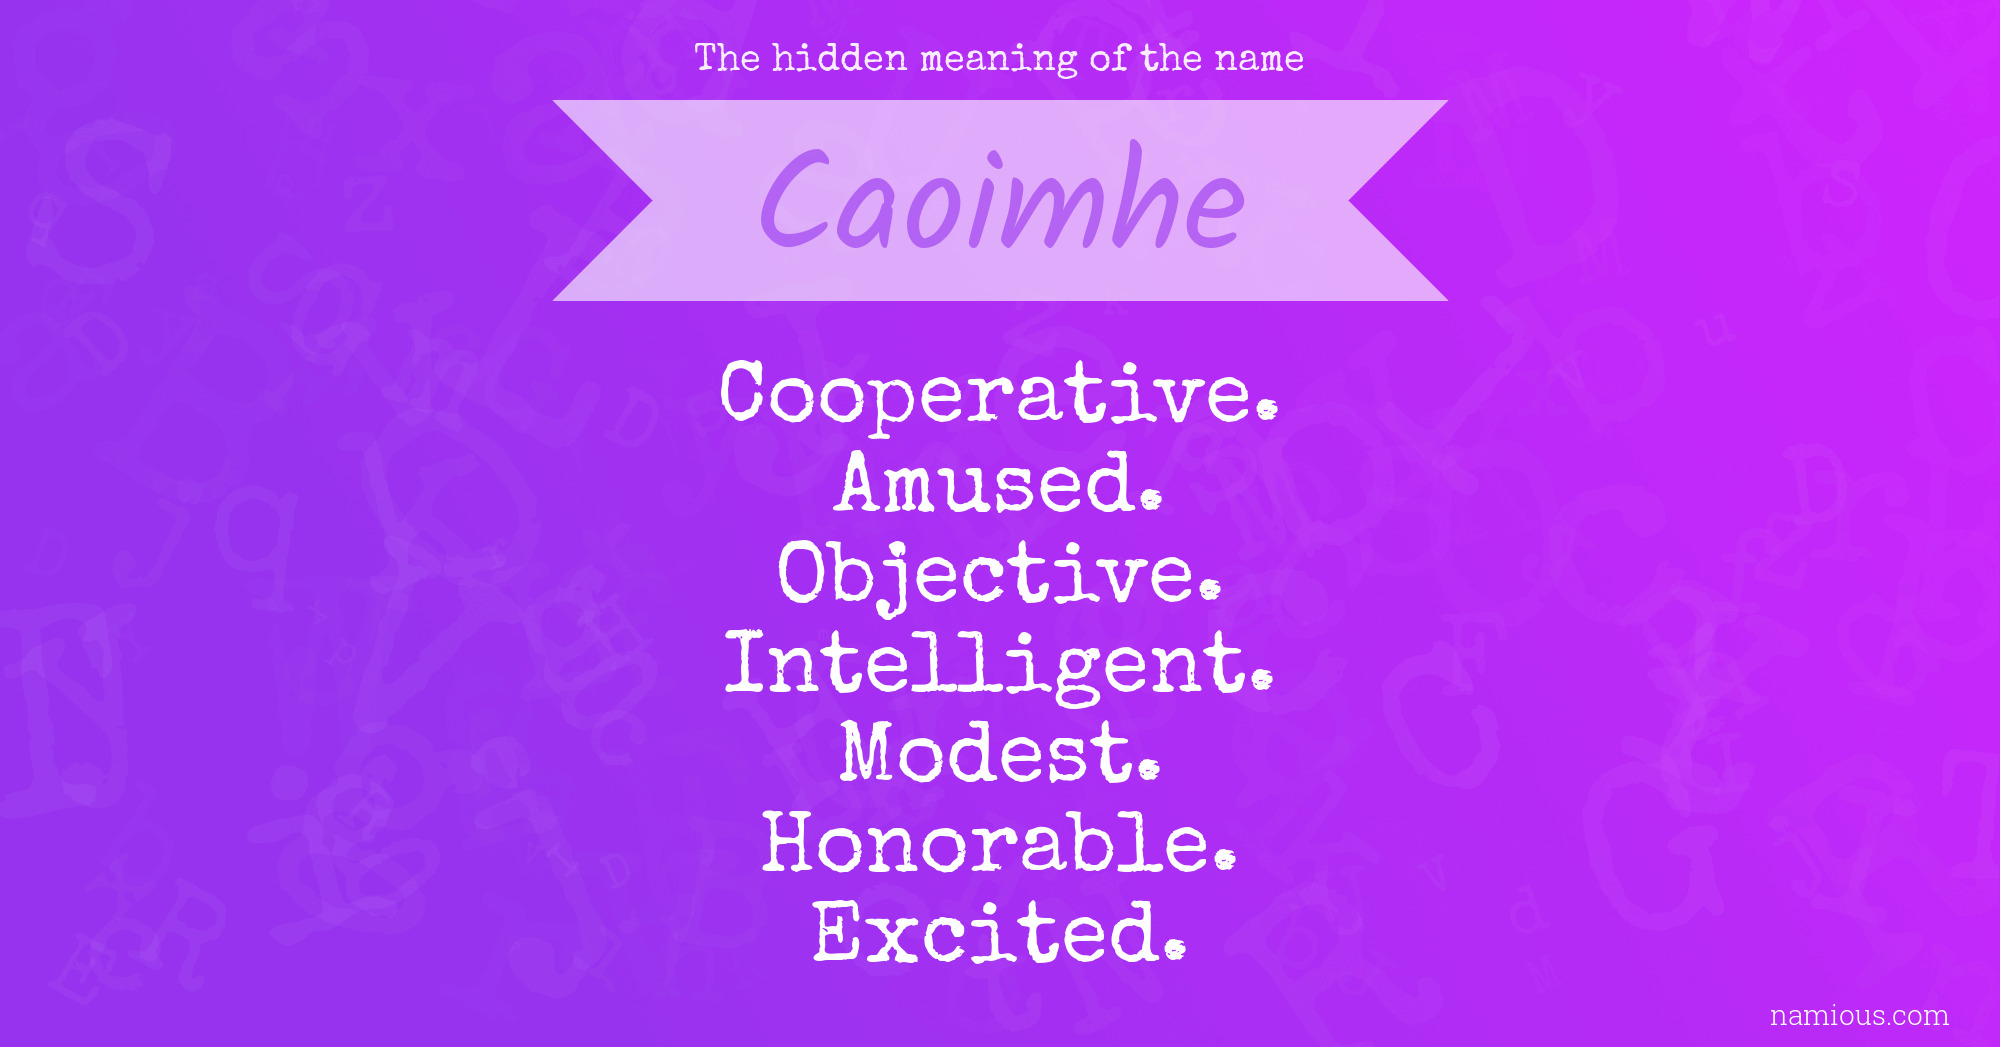 The hidden meaning of the name Caoimhe